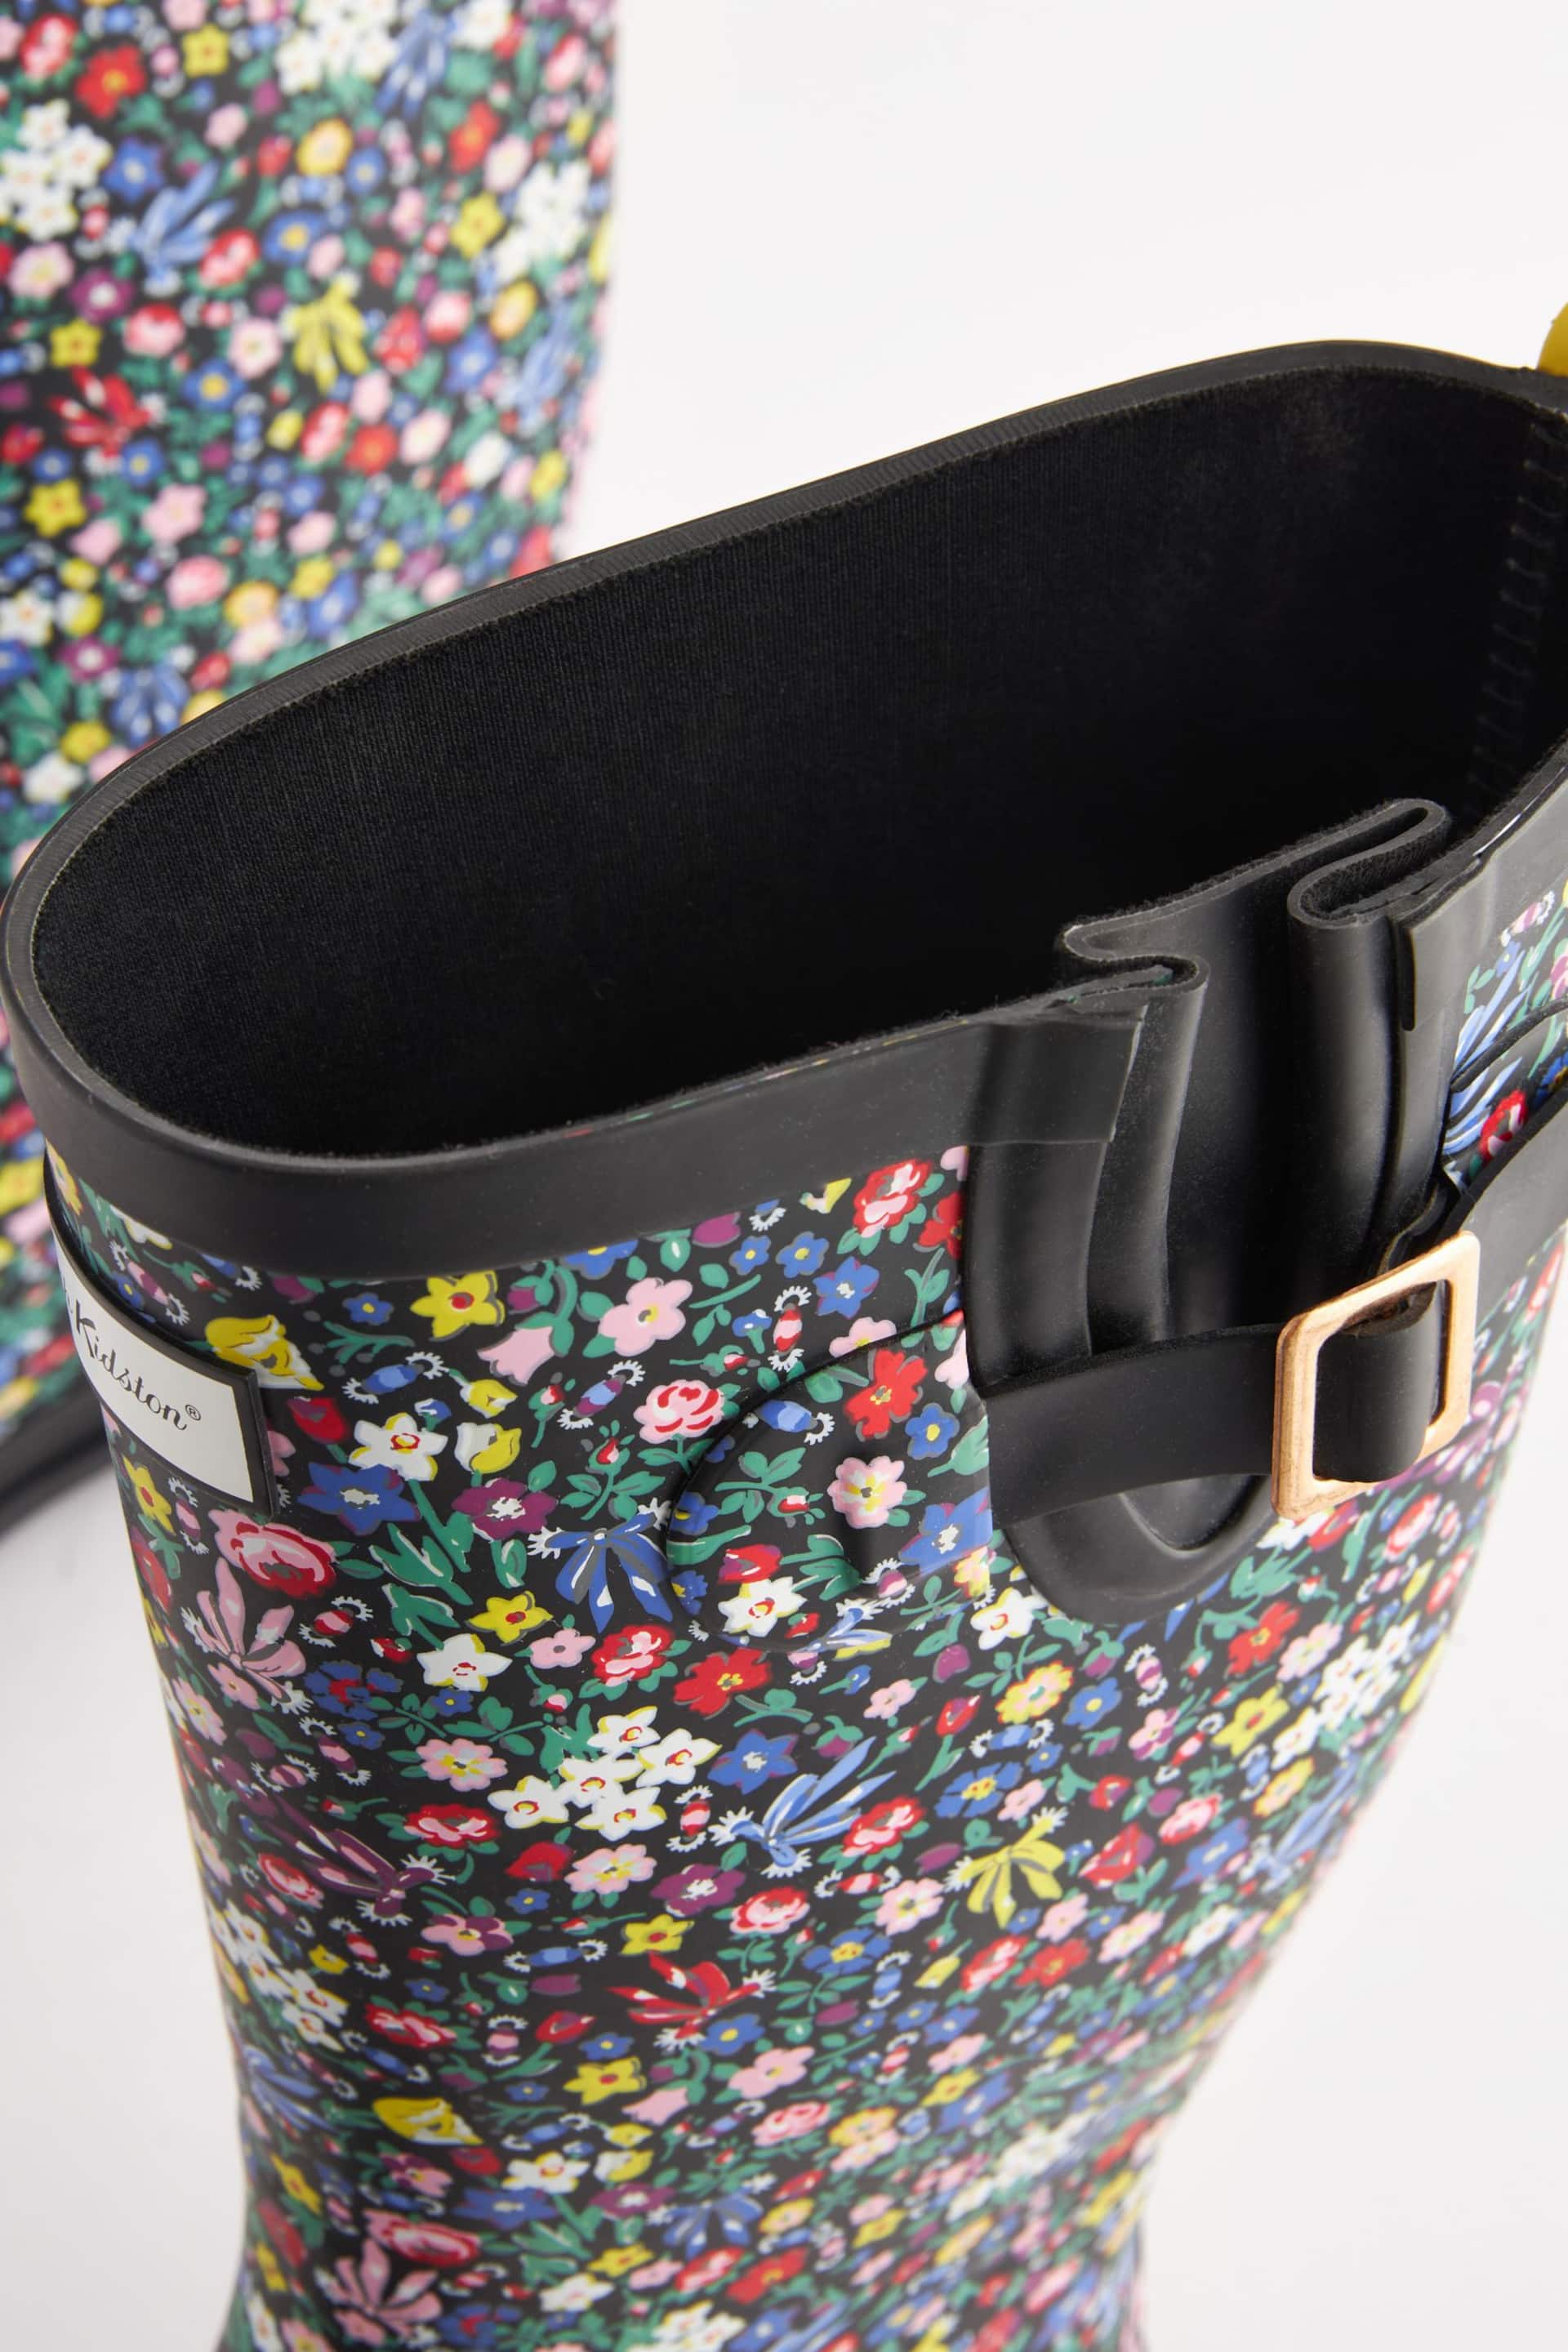 Cath Kidston Black Ditsy Floral Tall Wellies - Image 6 of 7